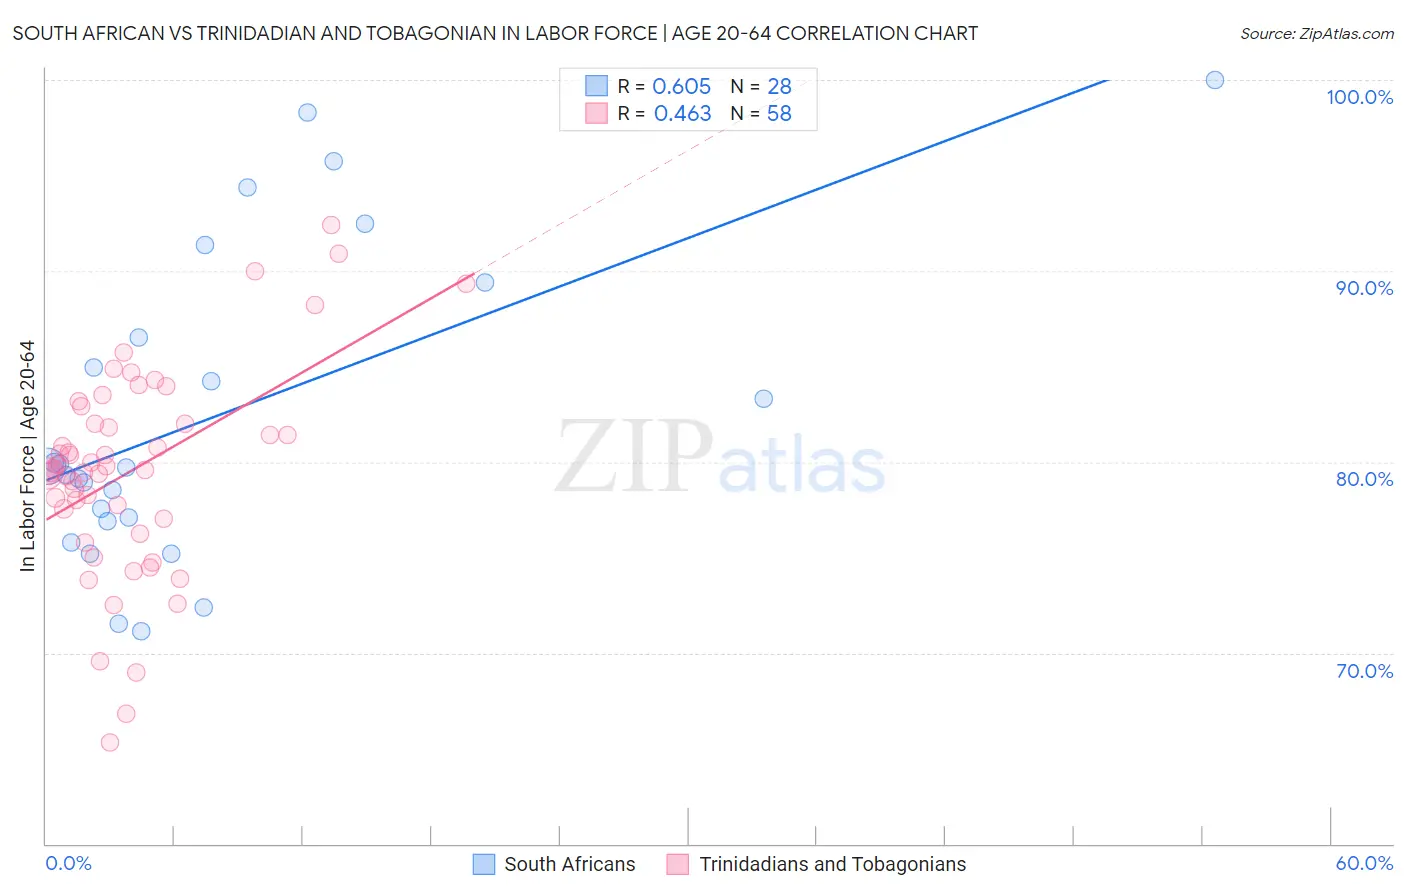 South African vs Trinidadian and Tobagonian In Labor Force | Age 20-64